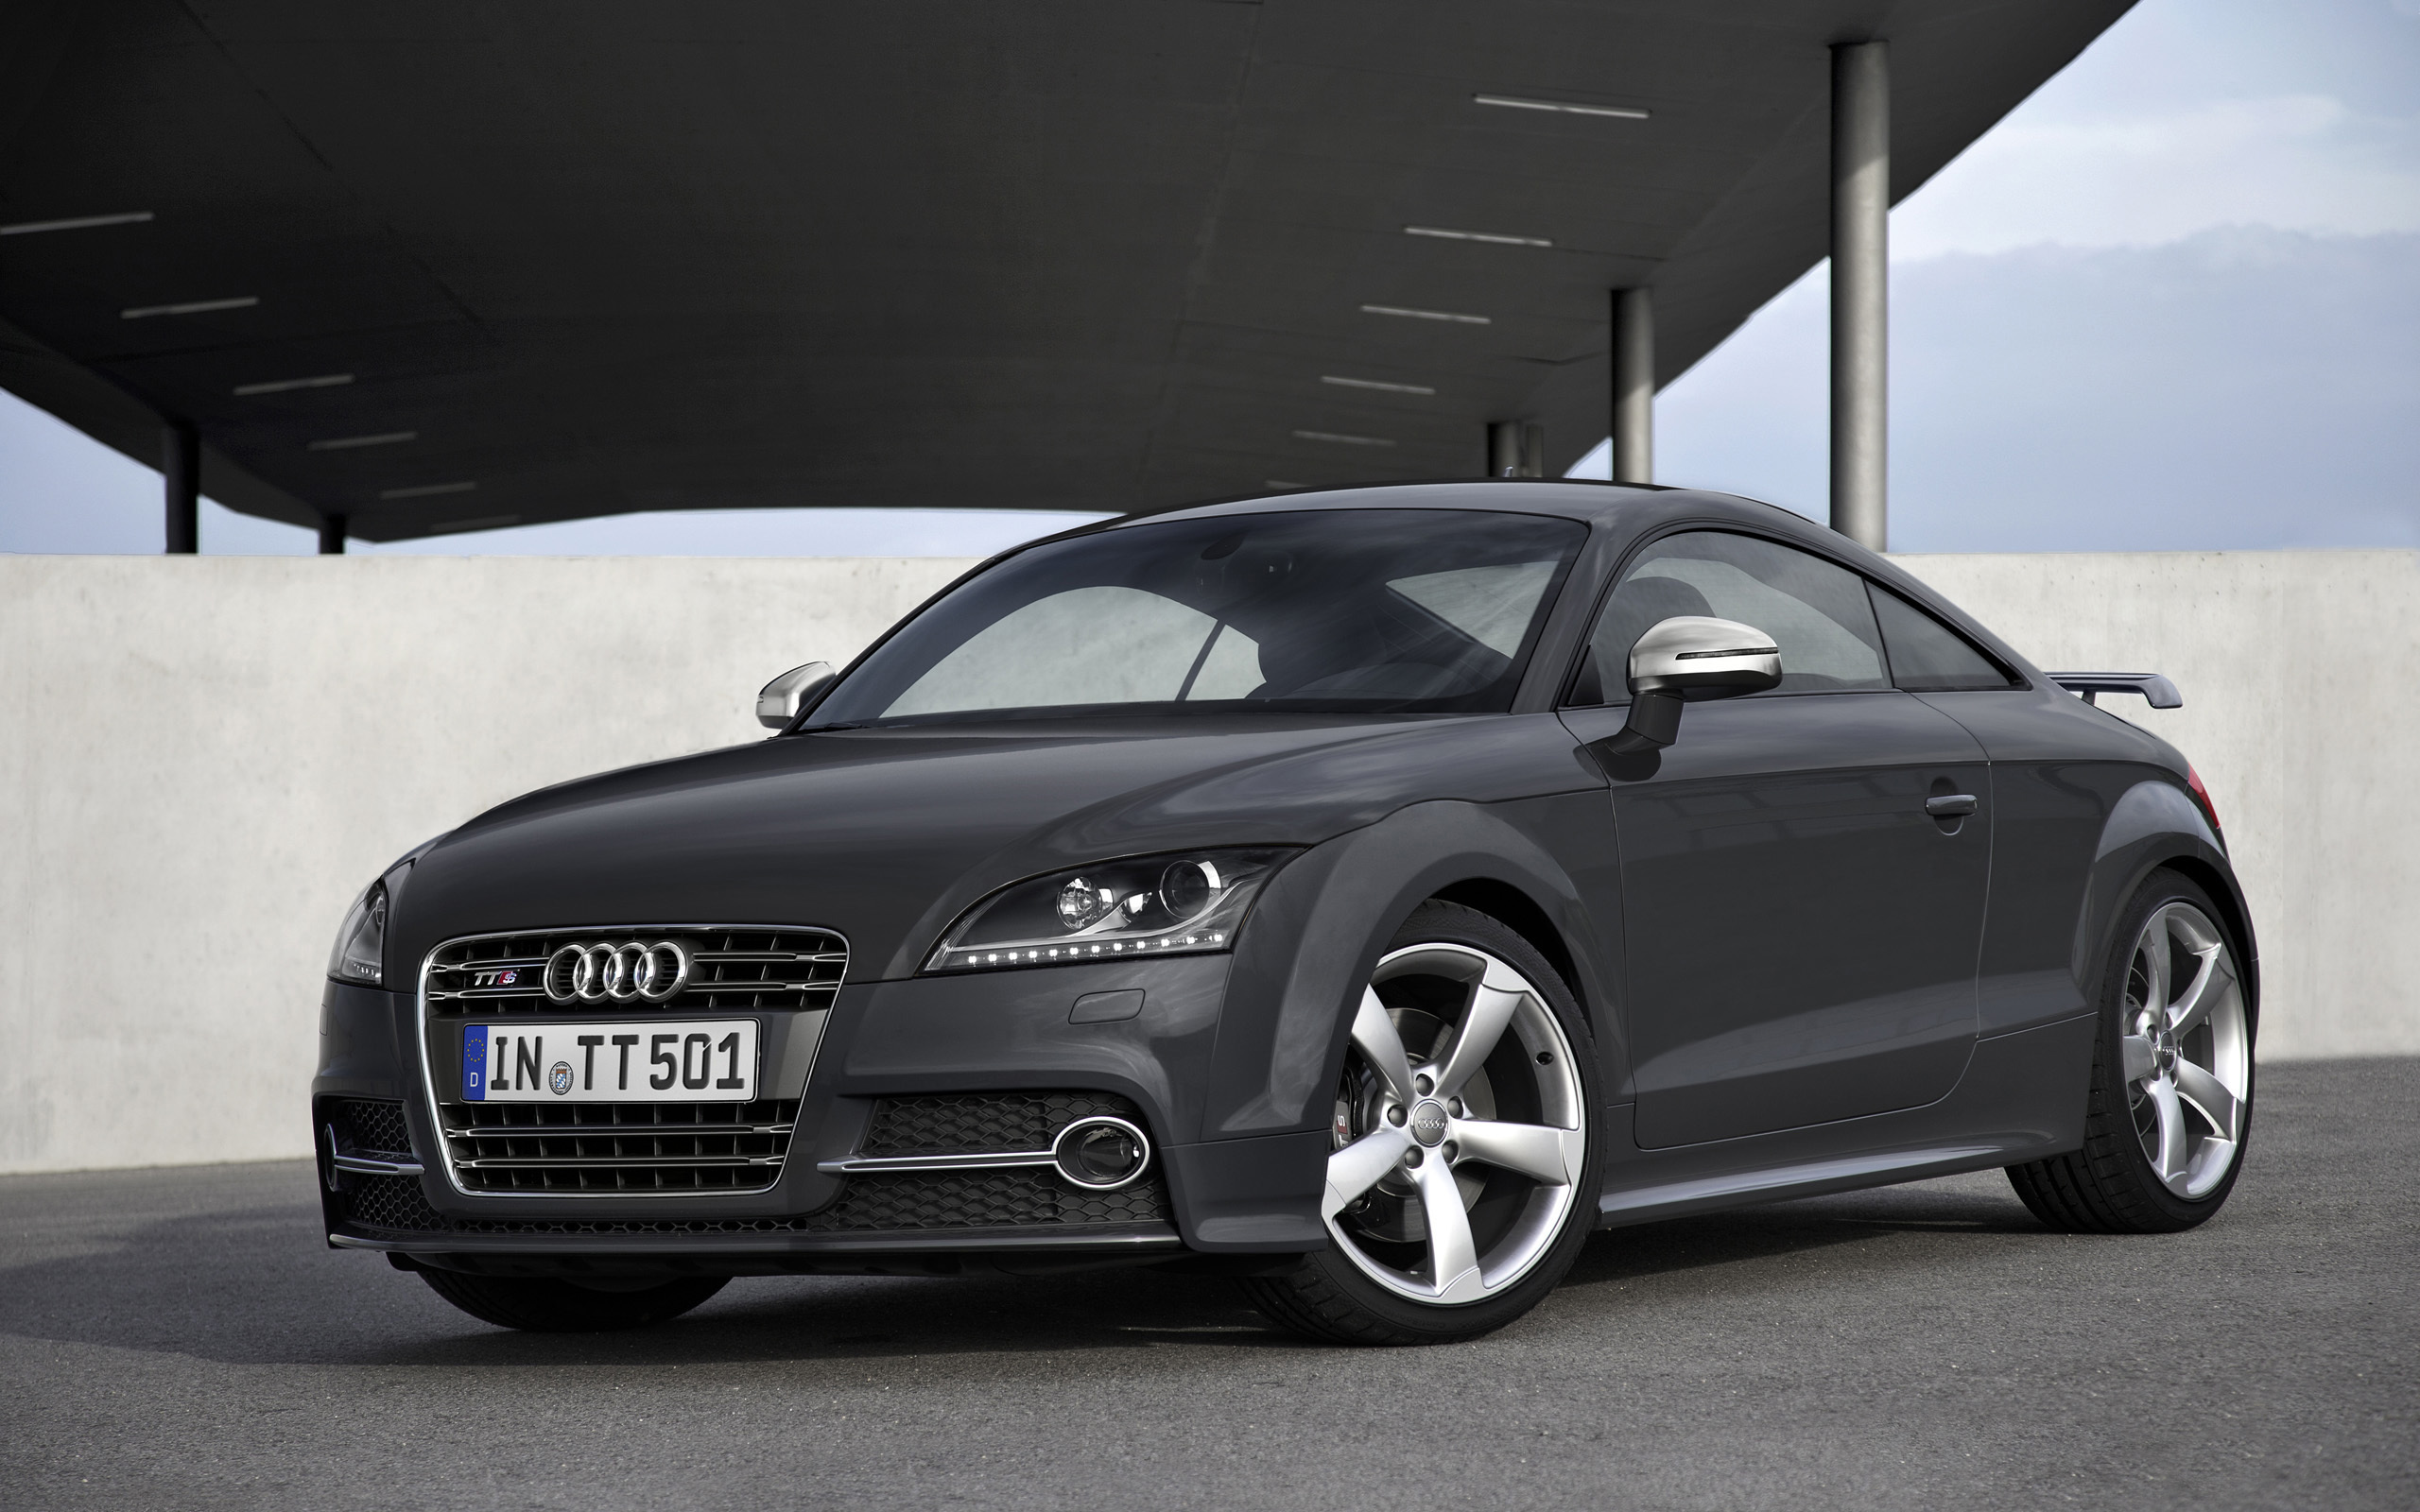 New car Audi TT 2014 wallpapers and images - wallpapers ...